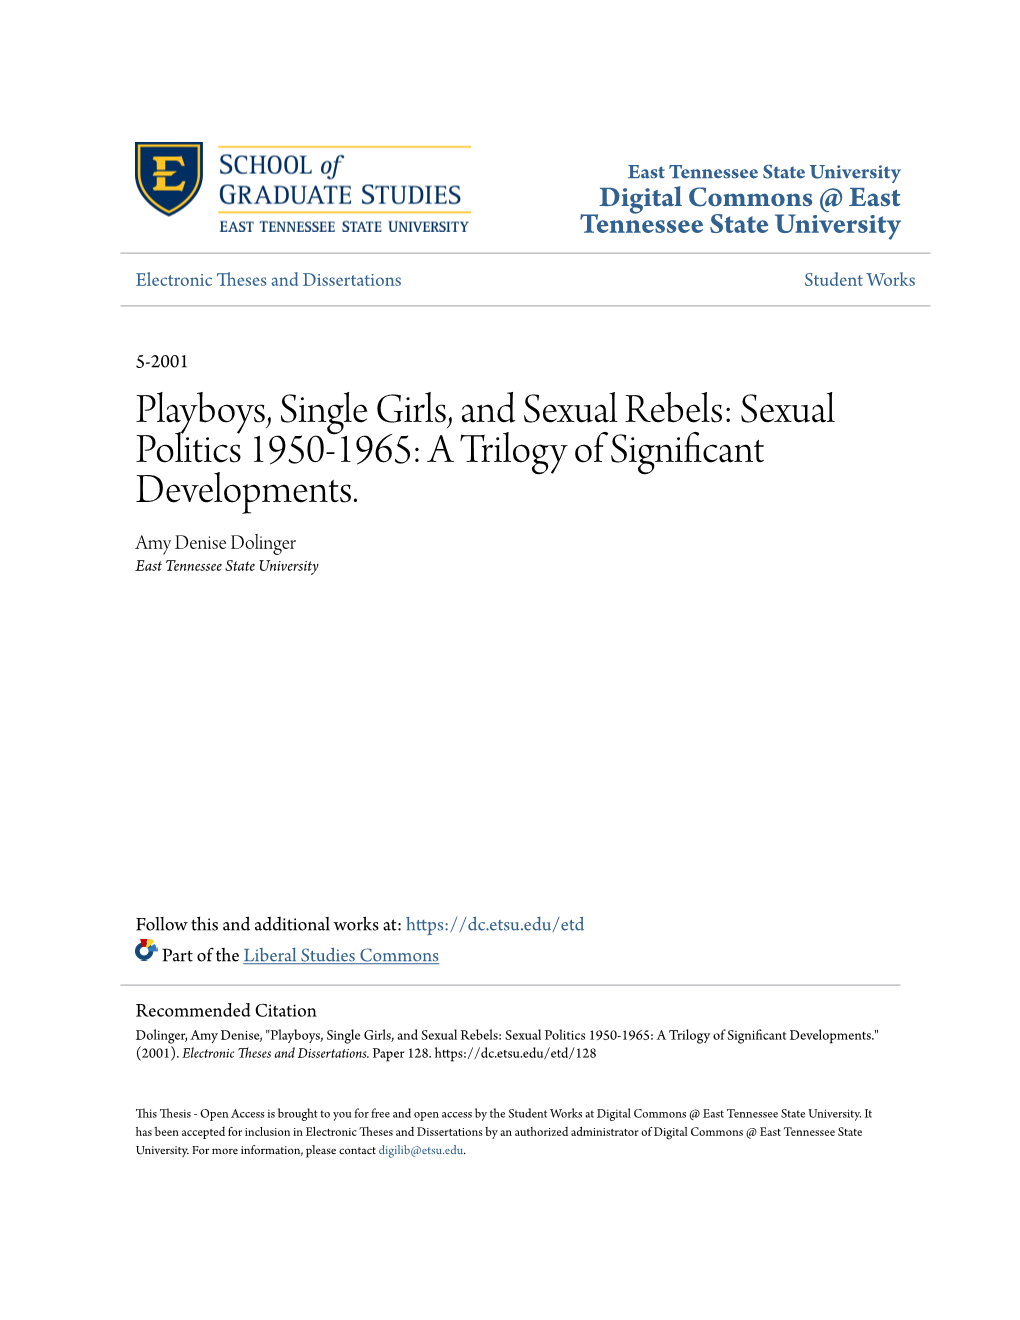 Playboys, Single Girls, and Sexual Rebels: Sexual Politics 1950-1965: a Trilogy of Significant Developments